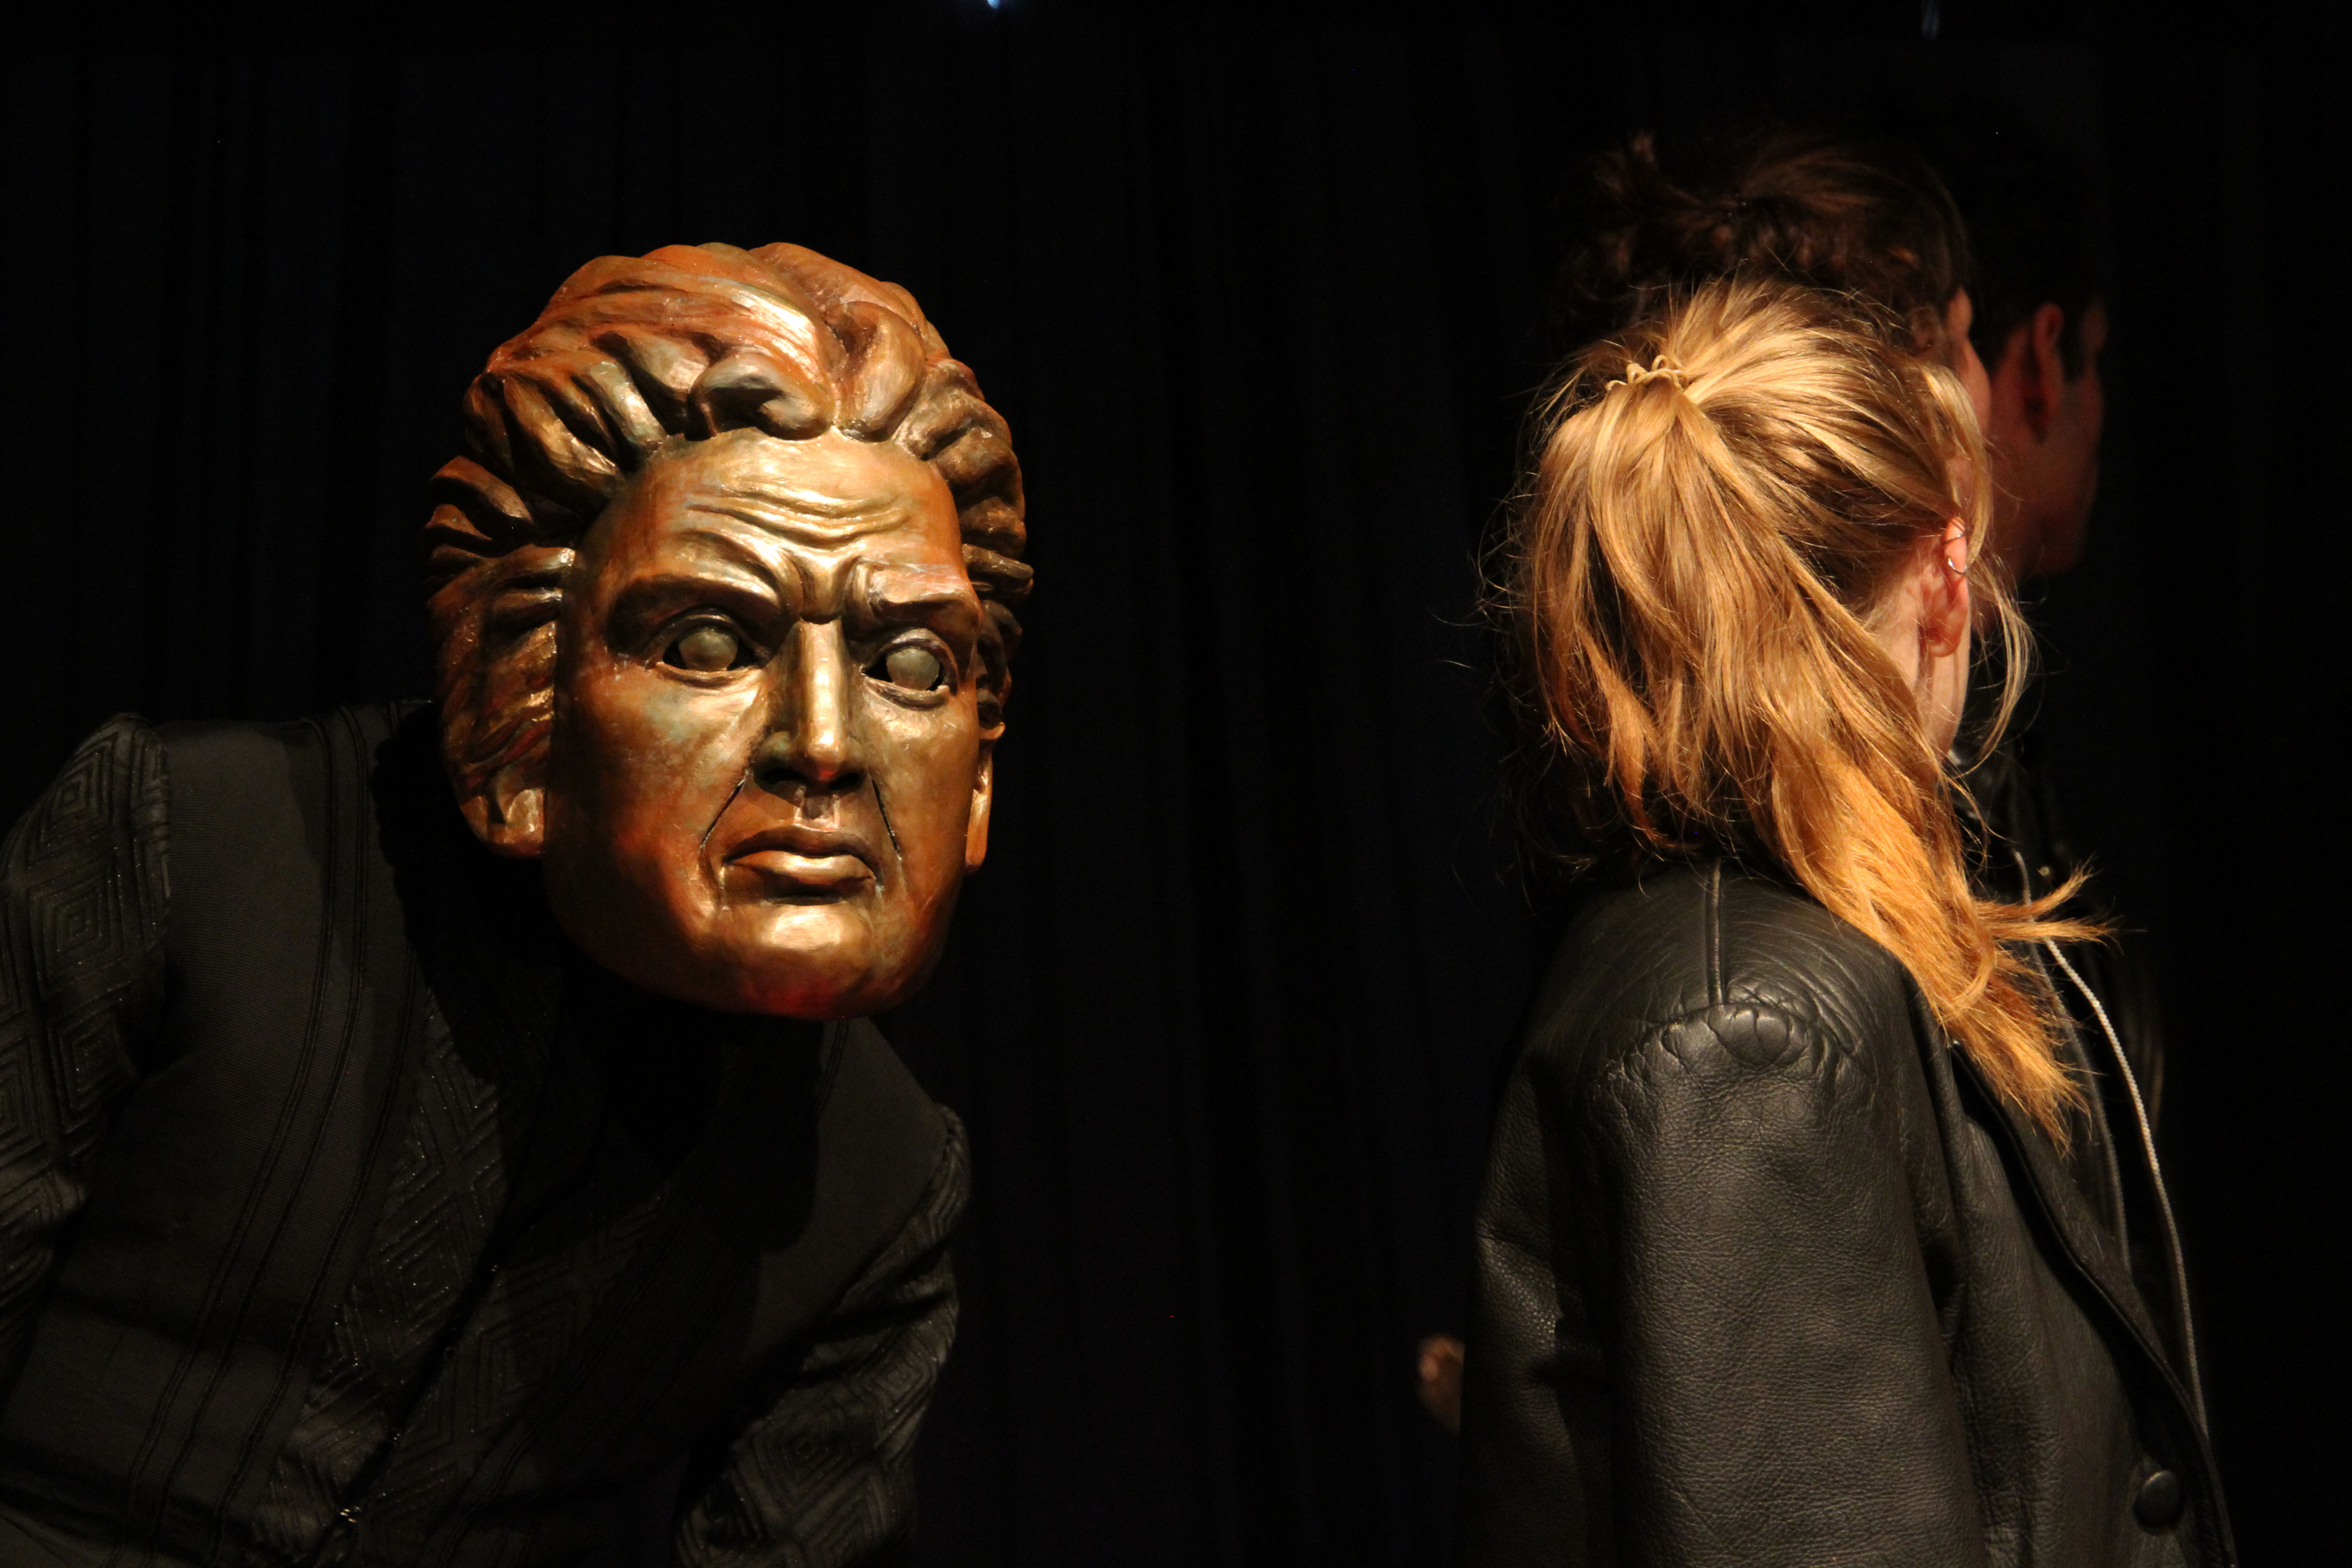 A man in black clothes wears a golden face mask with a furrowed brow. Next to him is a girl with blond hair. She has turned her head away from him.